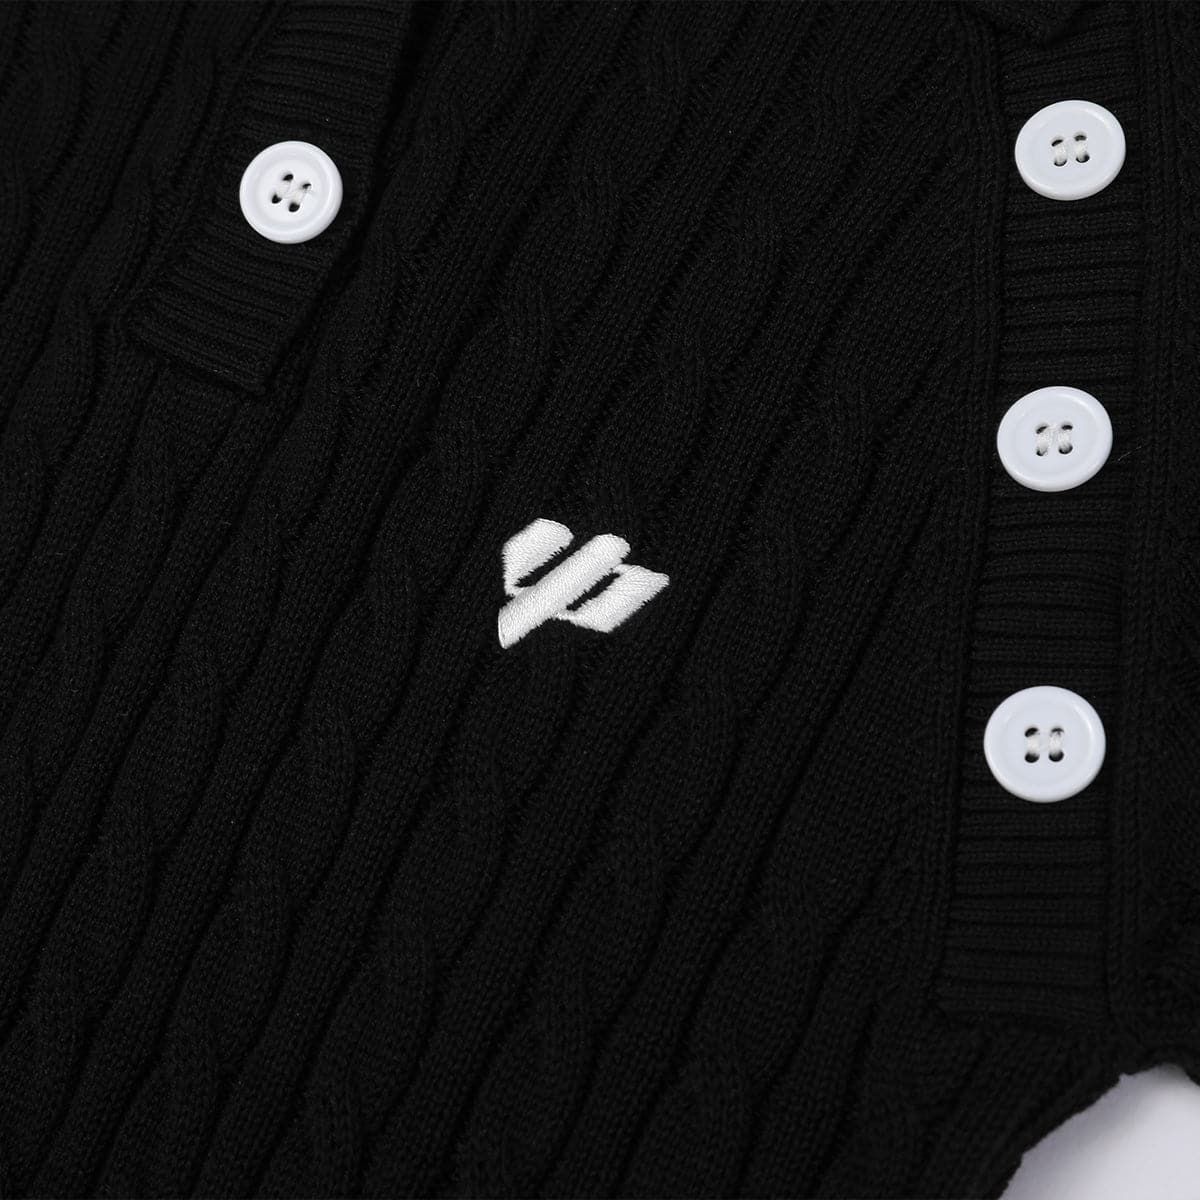 Black Knit Polo Top With Logo Embroidery - chiclara